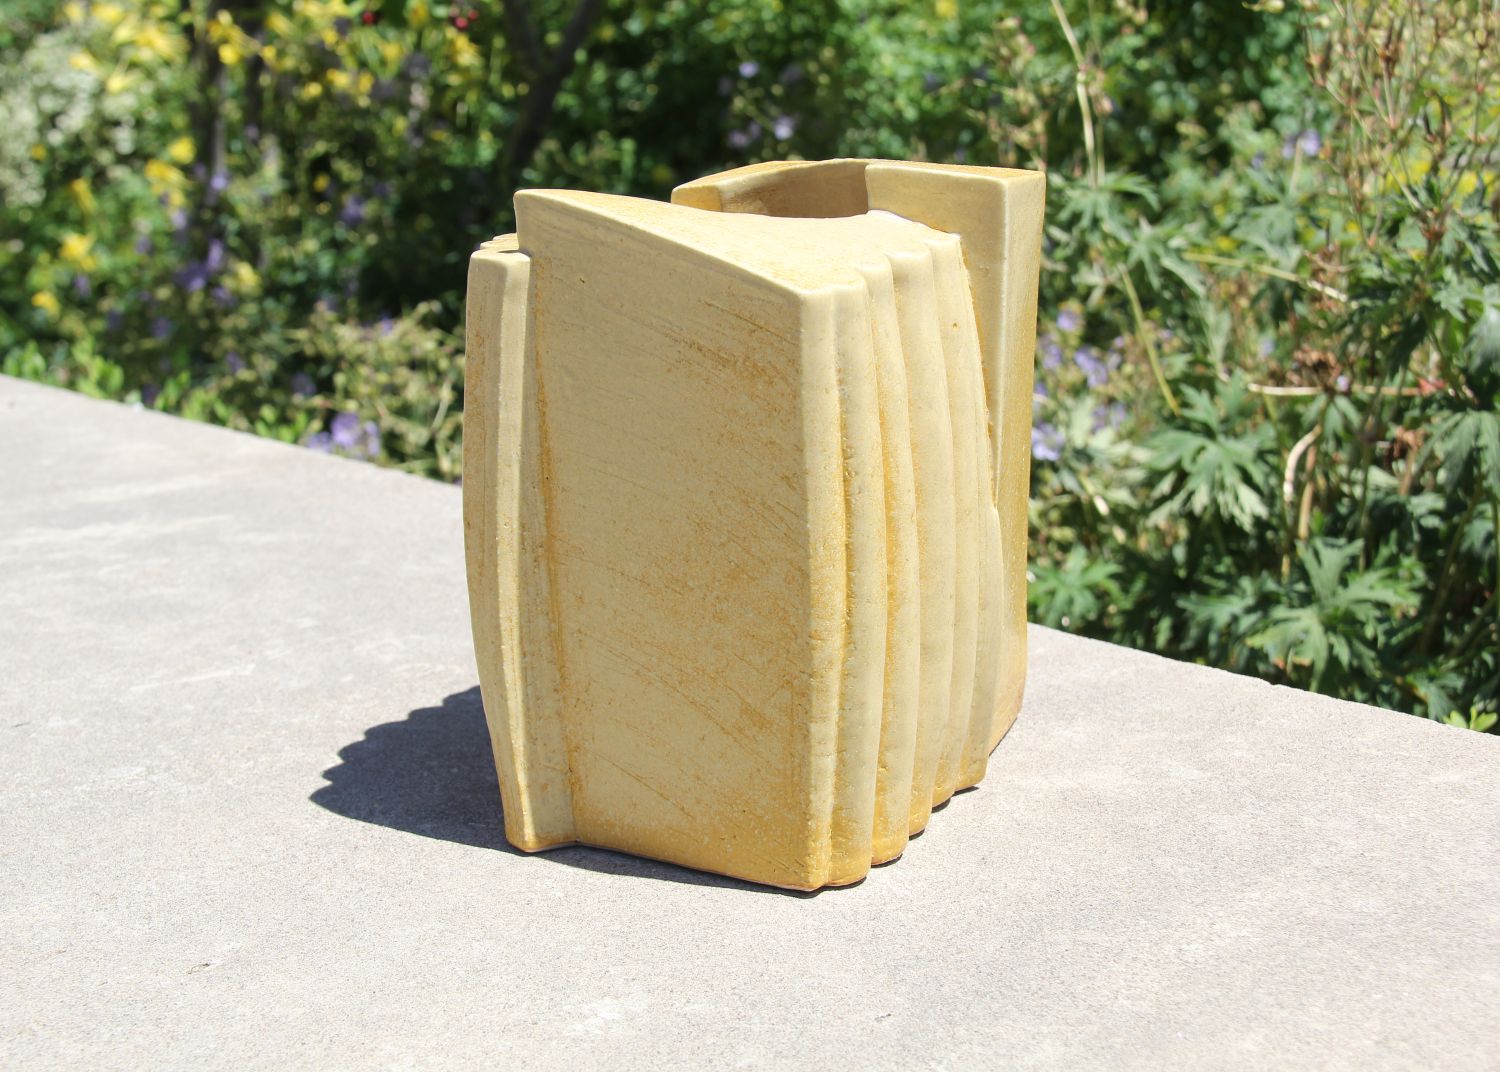 Bruce Cochrane: Sculptural Vase in Yellow Product Image 5 of 5